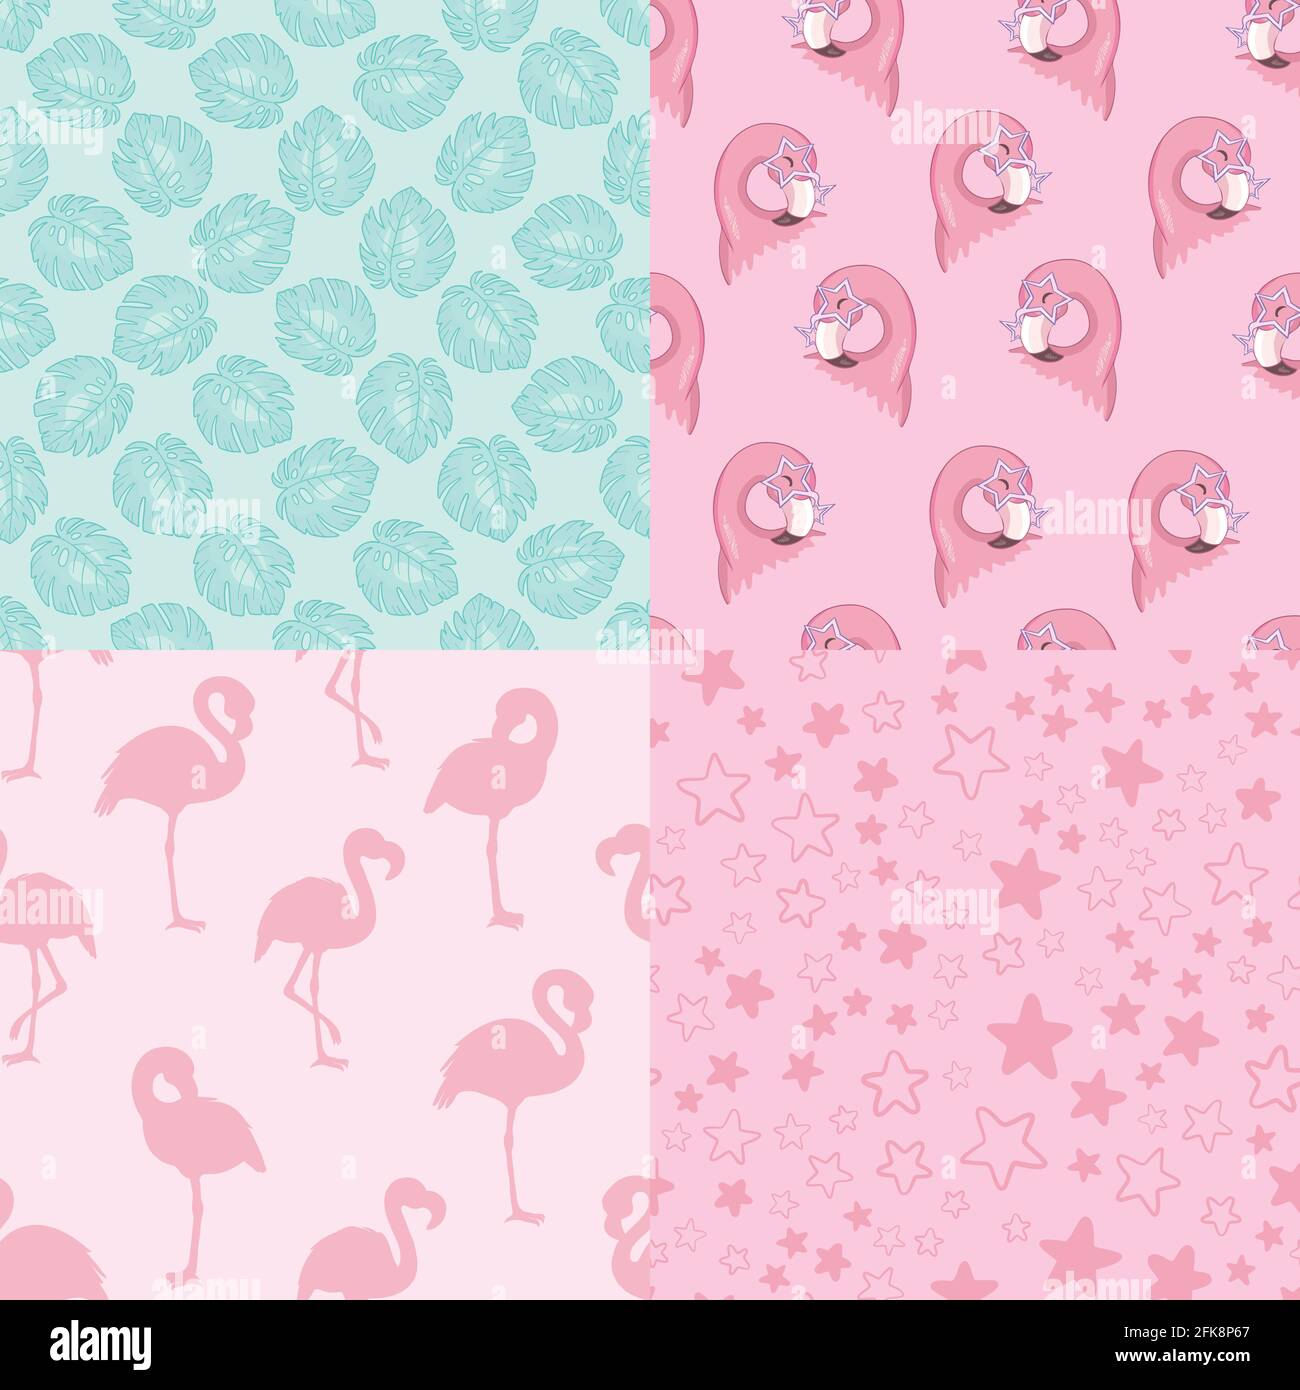 Set of vector wallpapers set of seamless patterns with images of flamingos Stock Vector